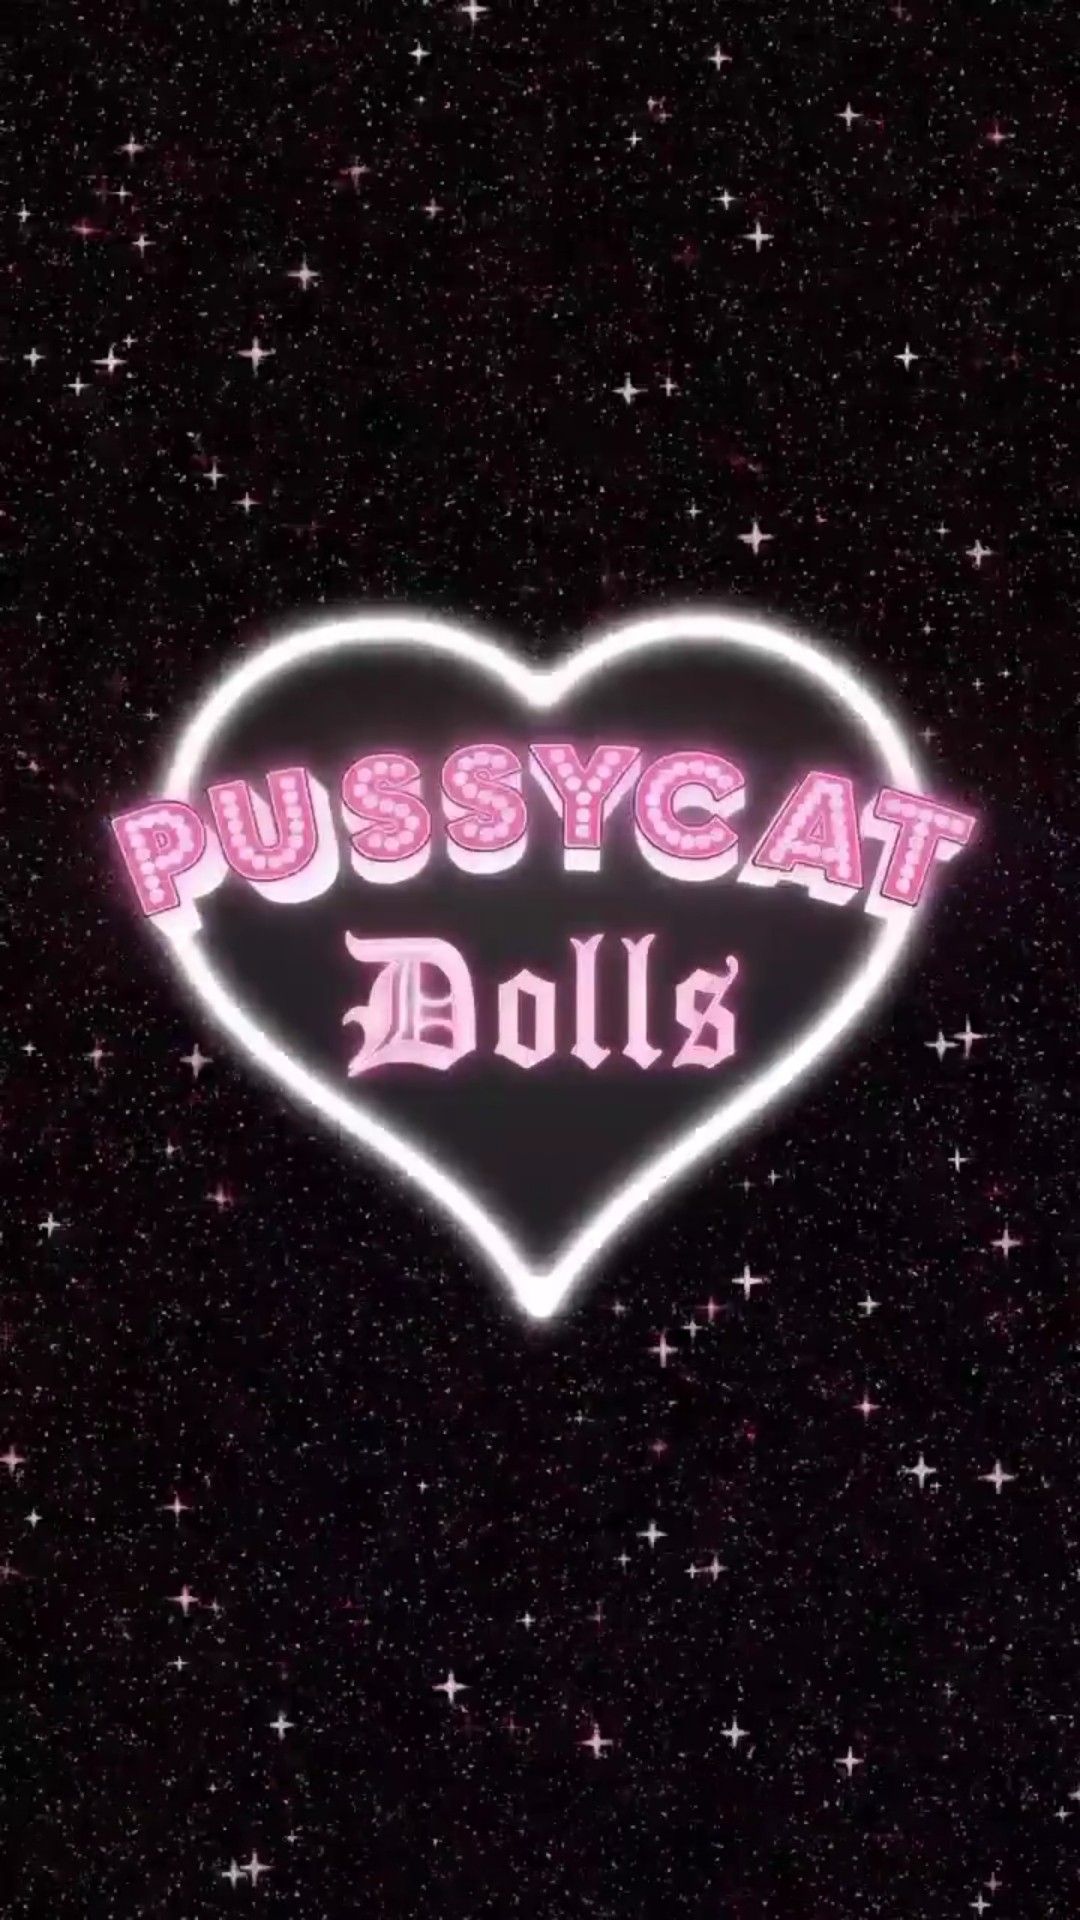 The Pussycat Dolls Wallpapers